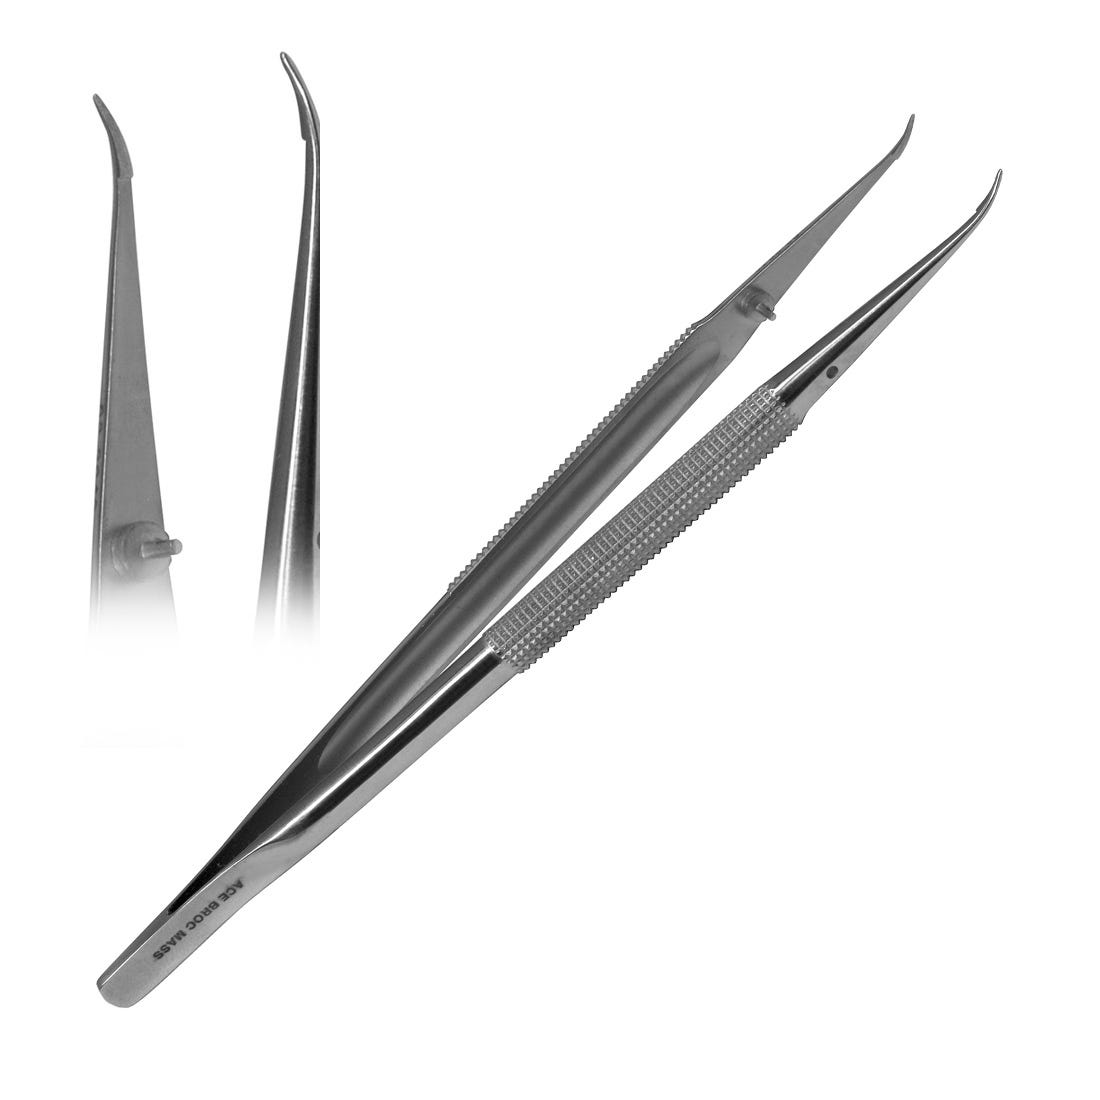 McAllister Connective Tissue Graft Placement Instrument, curved